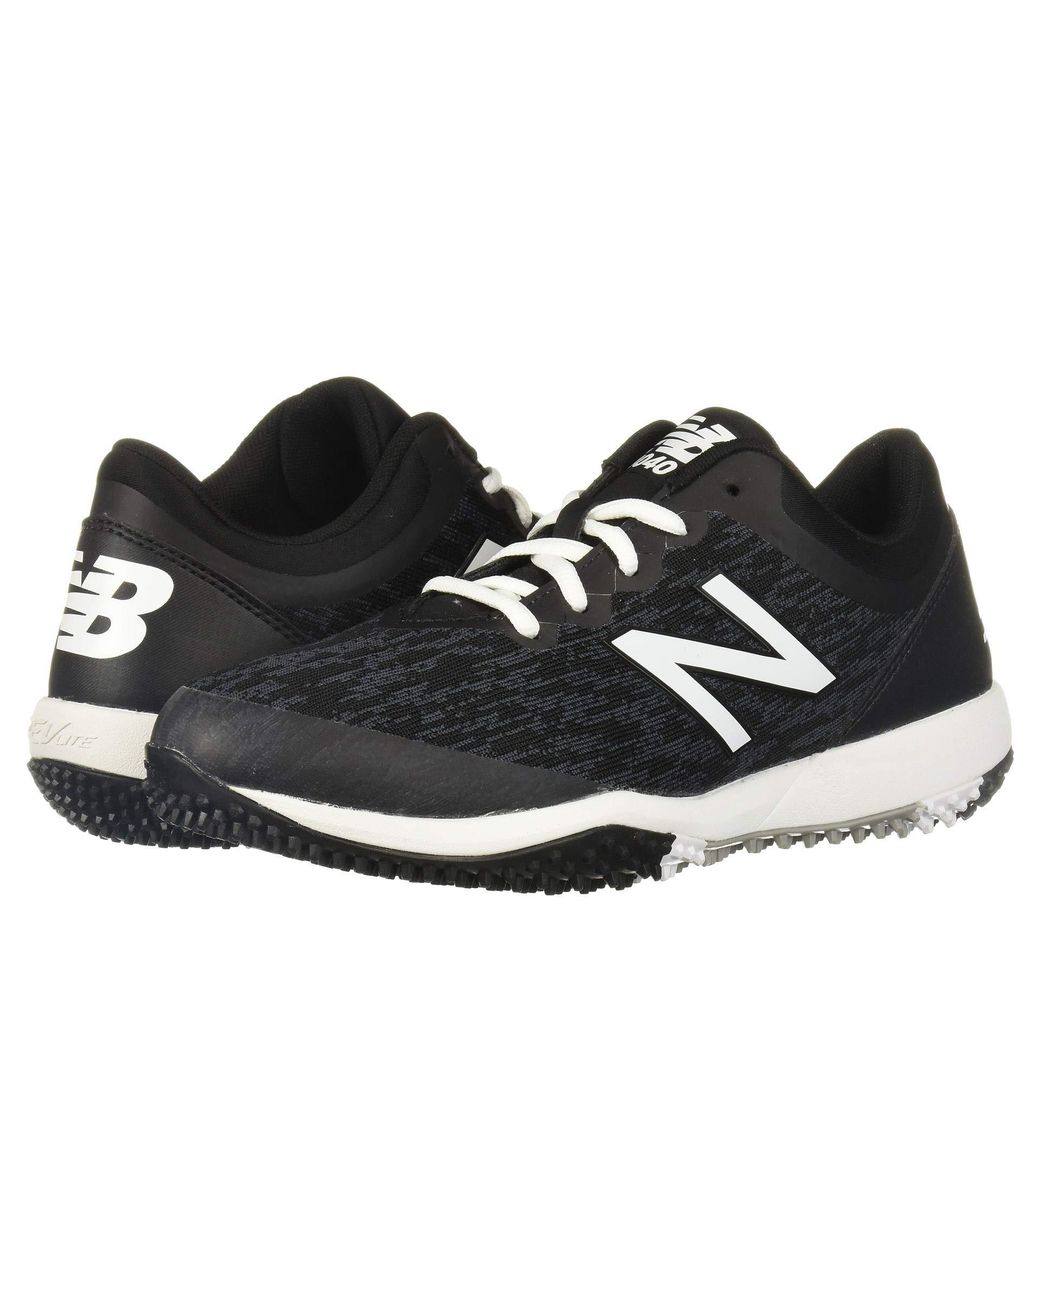 New Balance Synthetic 4040v5 Turf in Black for Men - Lyst